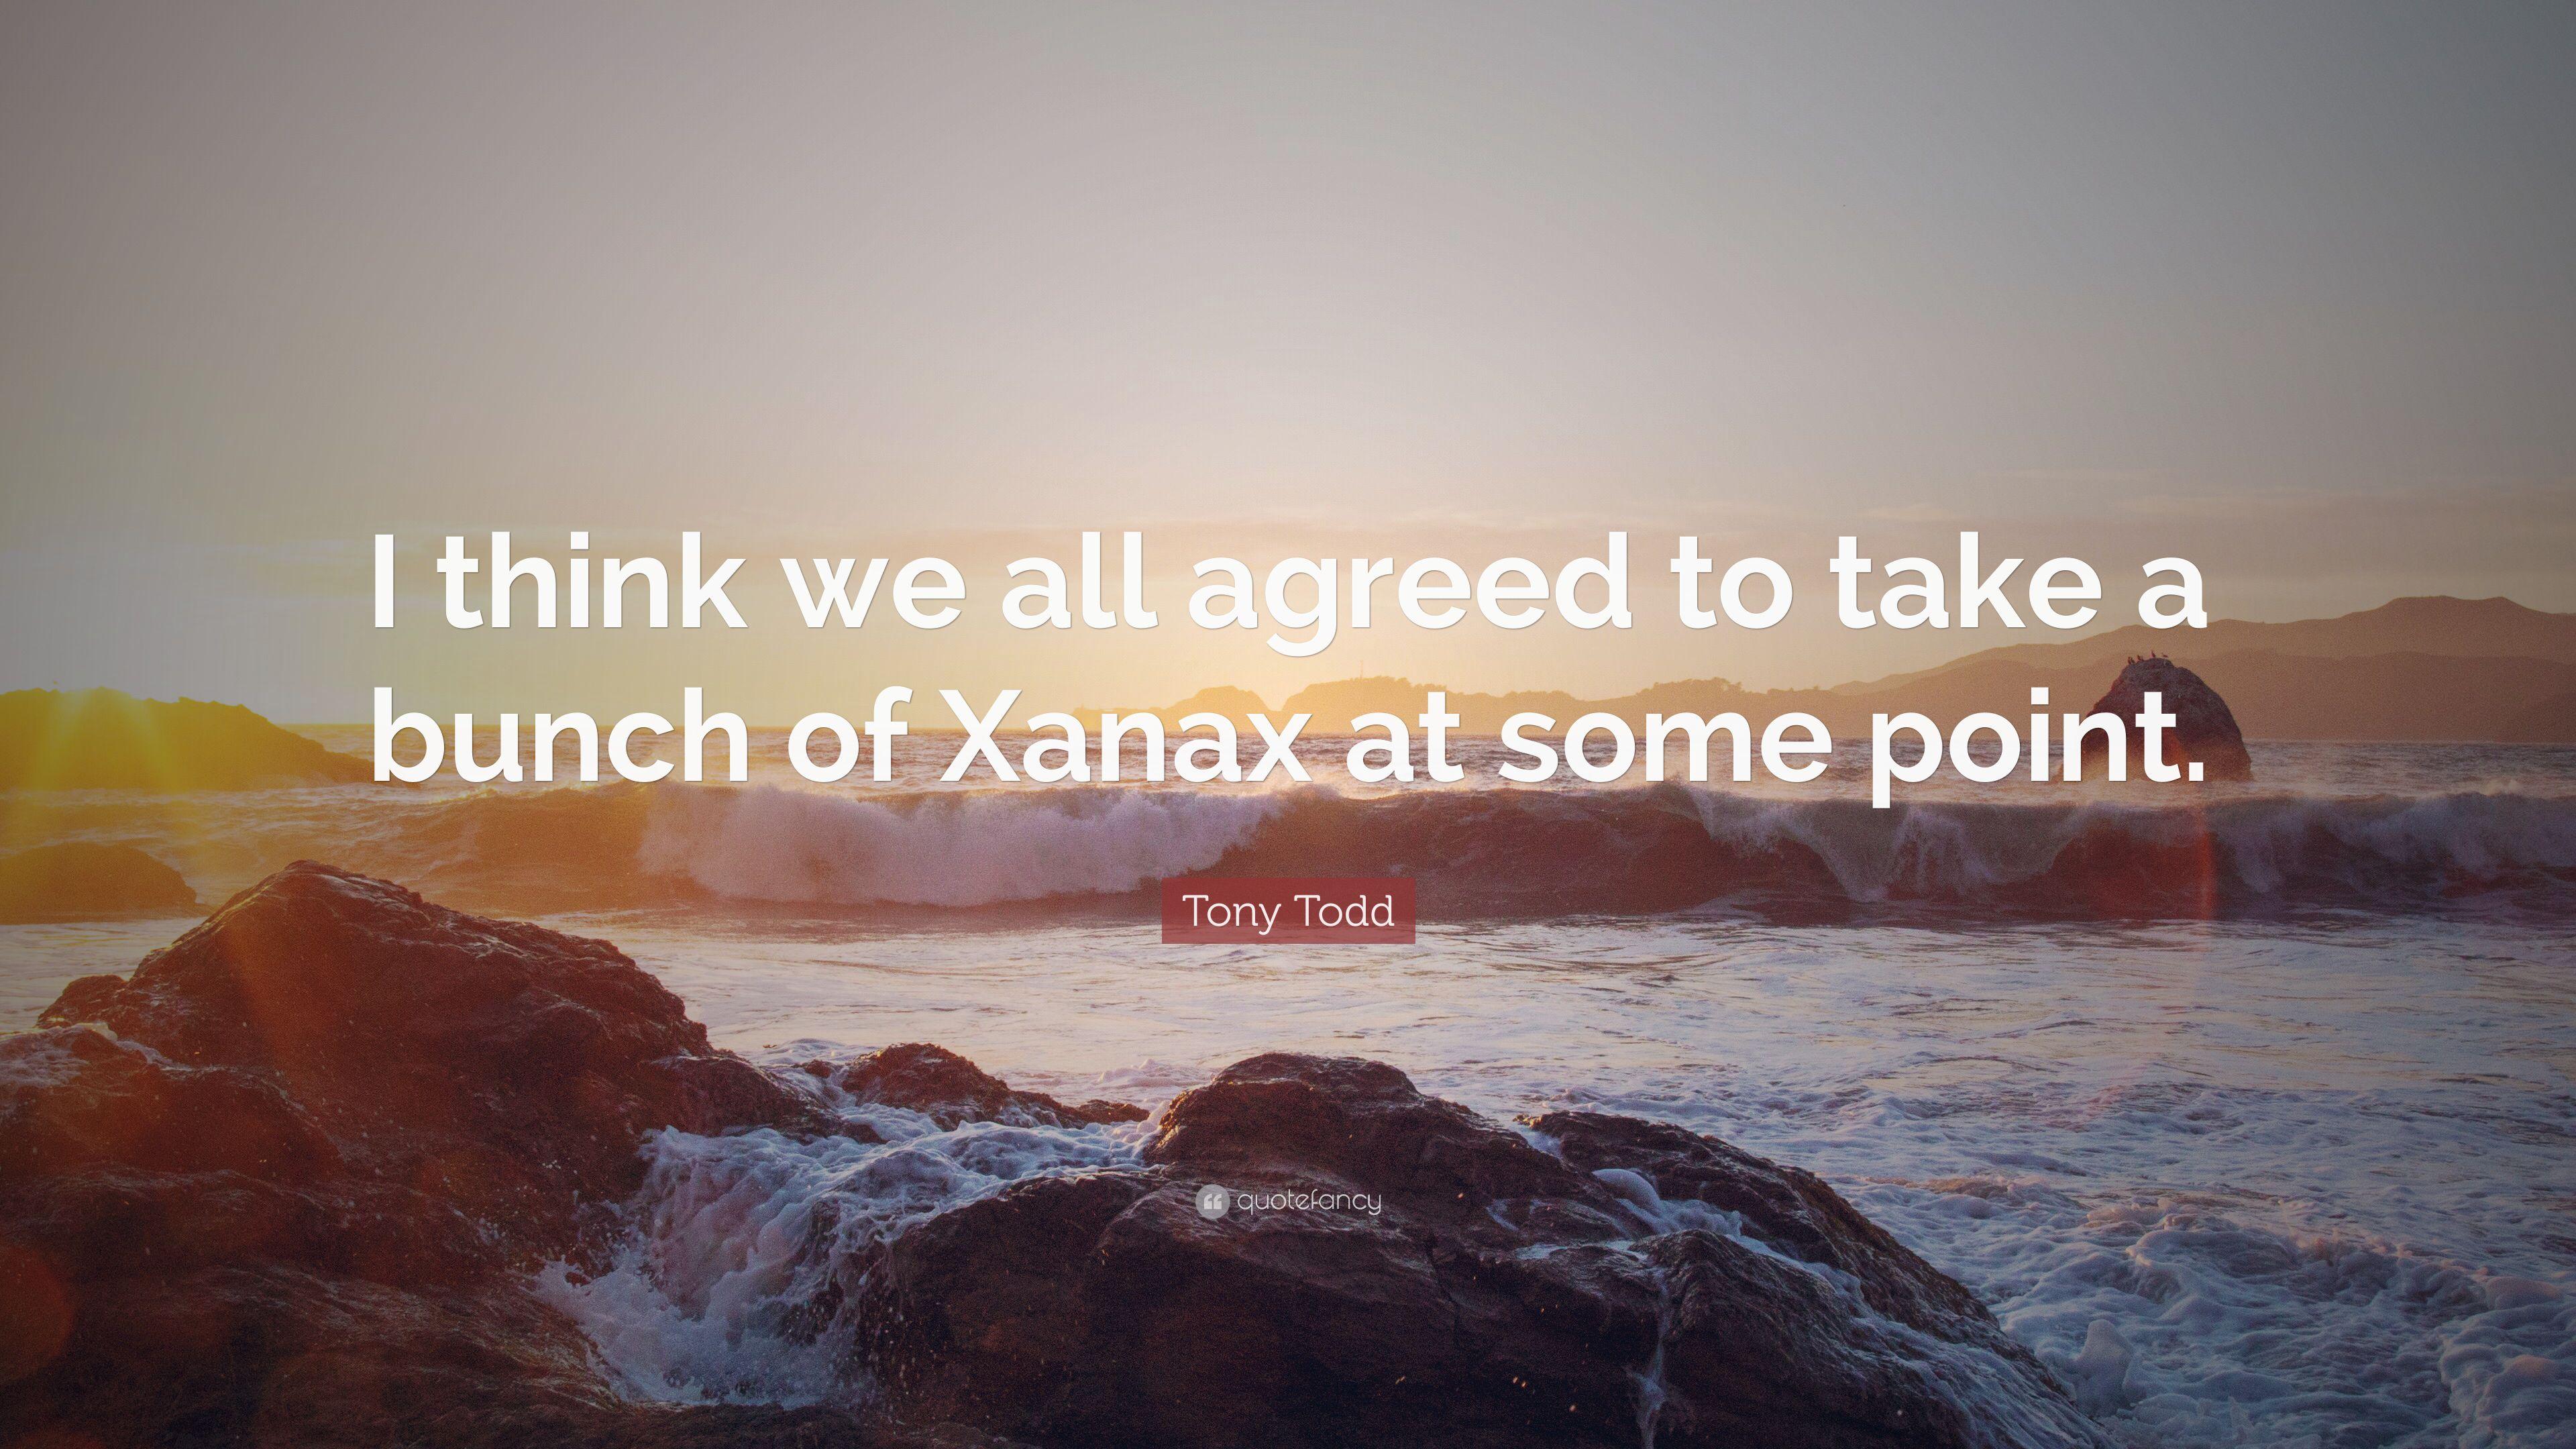 Tony Todd Quote: “I think we all agreed to take a bunch of Xanax